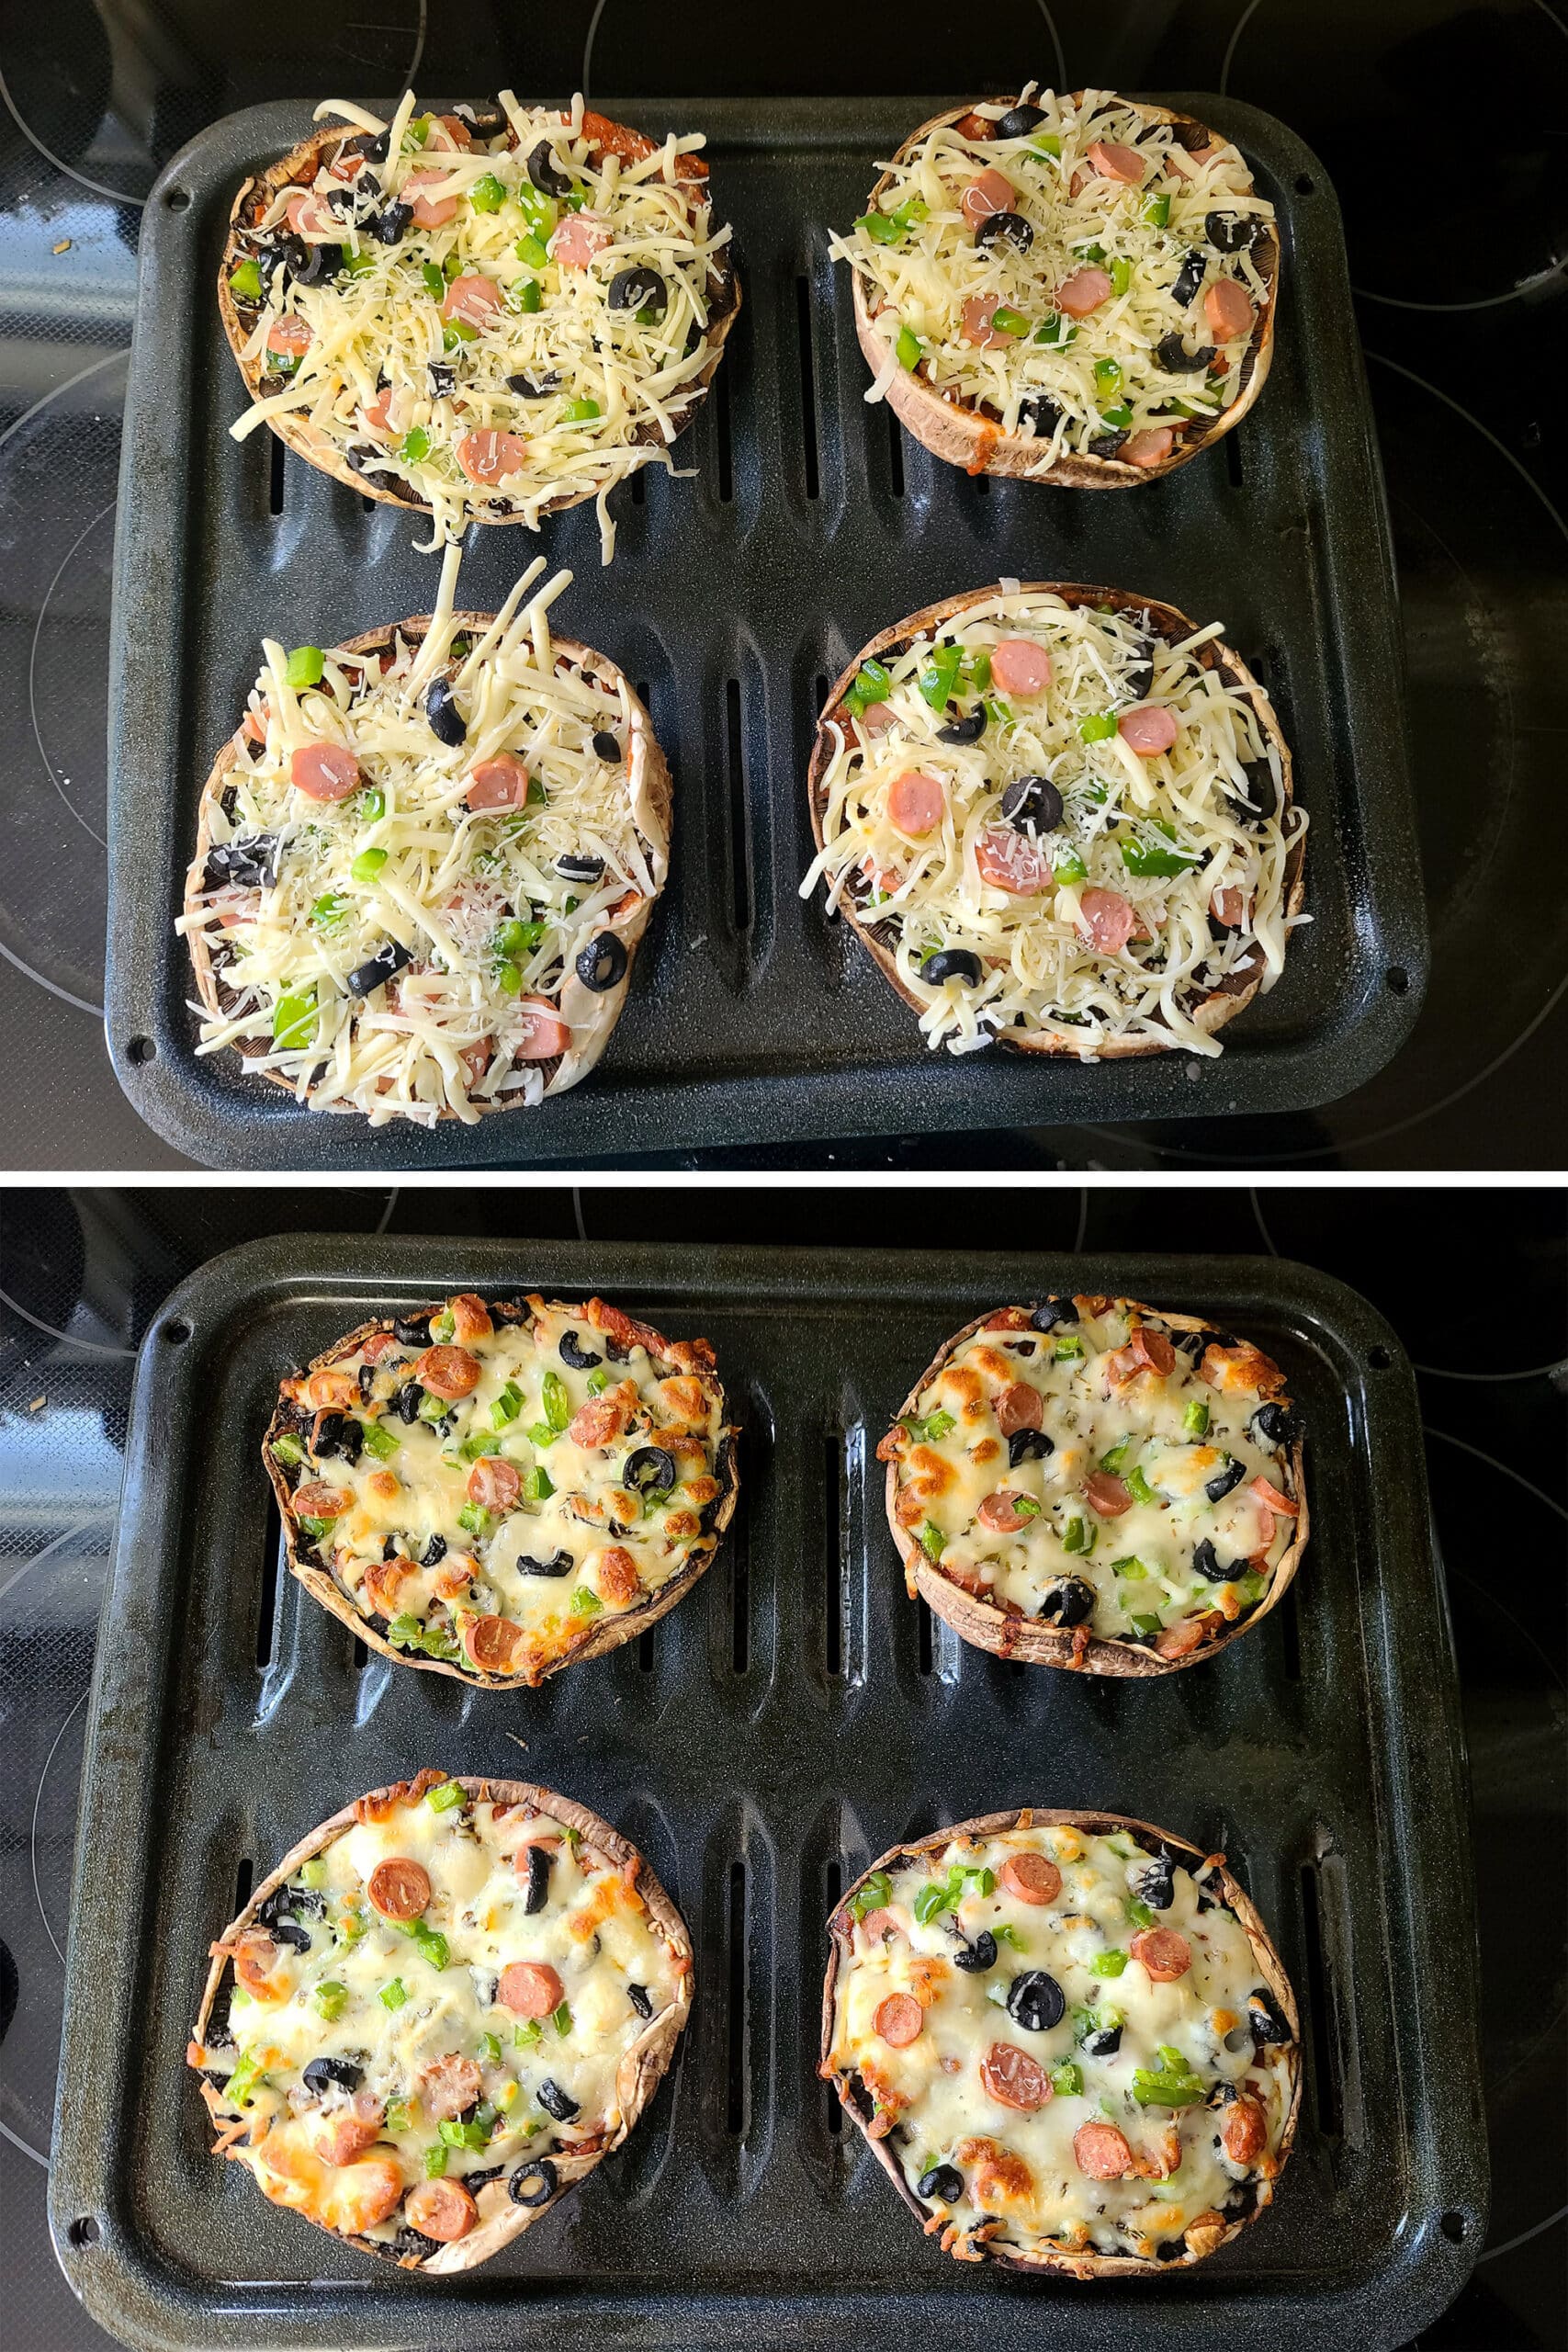 4 prepared portobello mushroom pizzas on a broiling pan, before and after cooking.